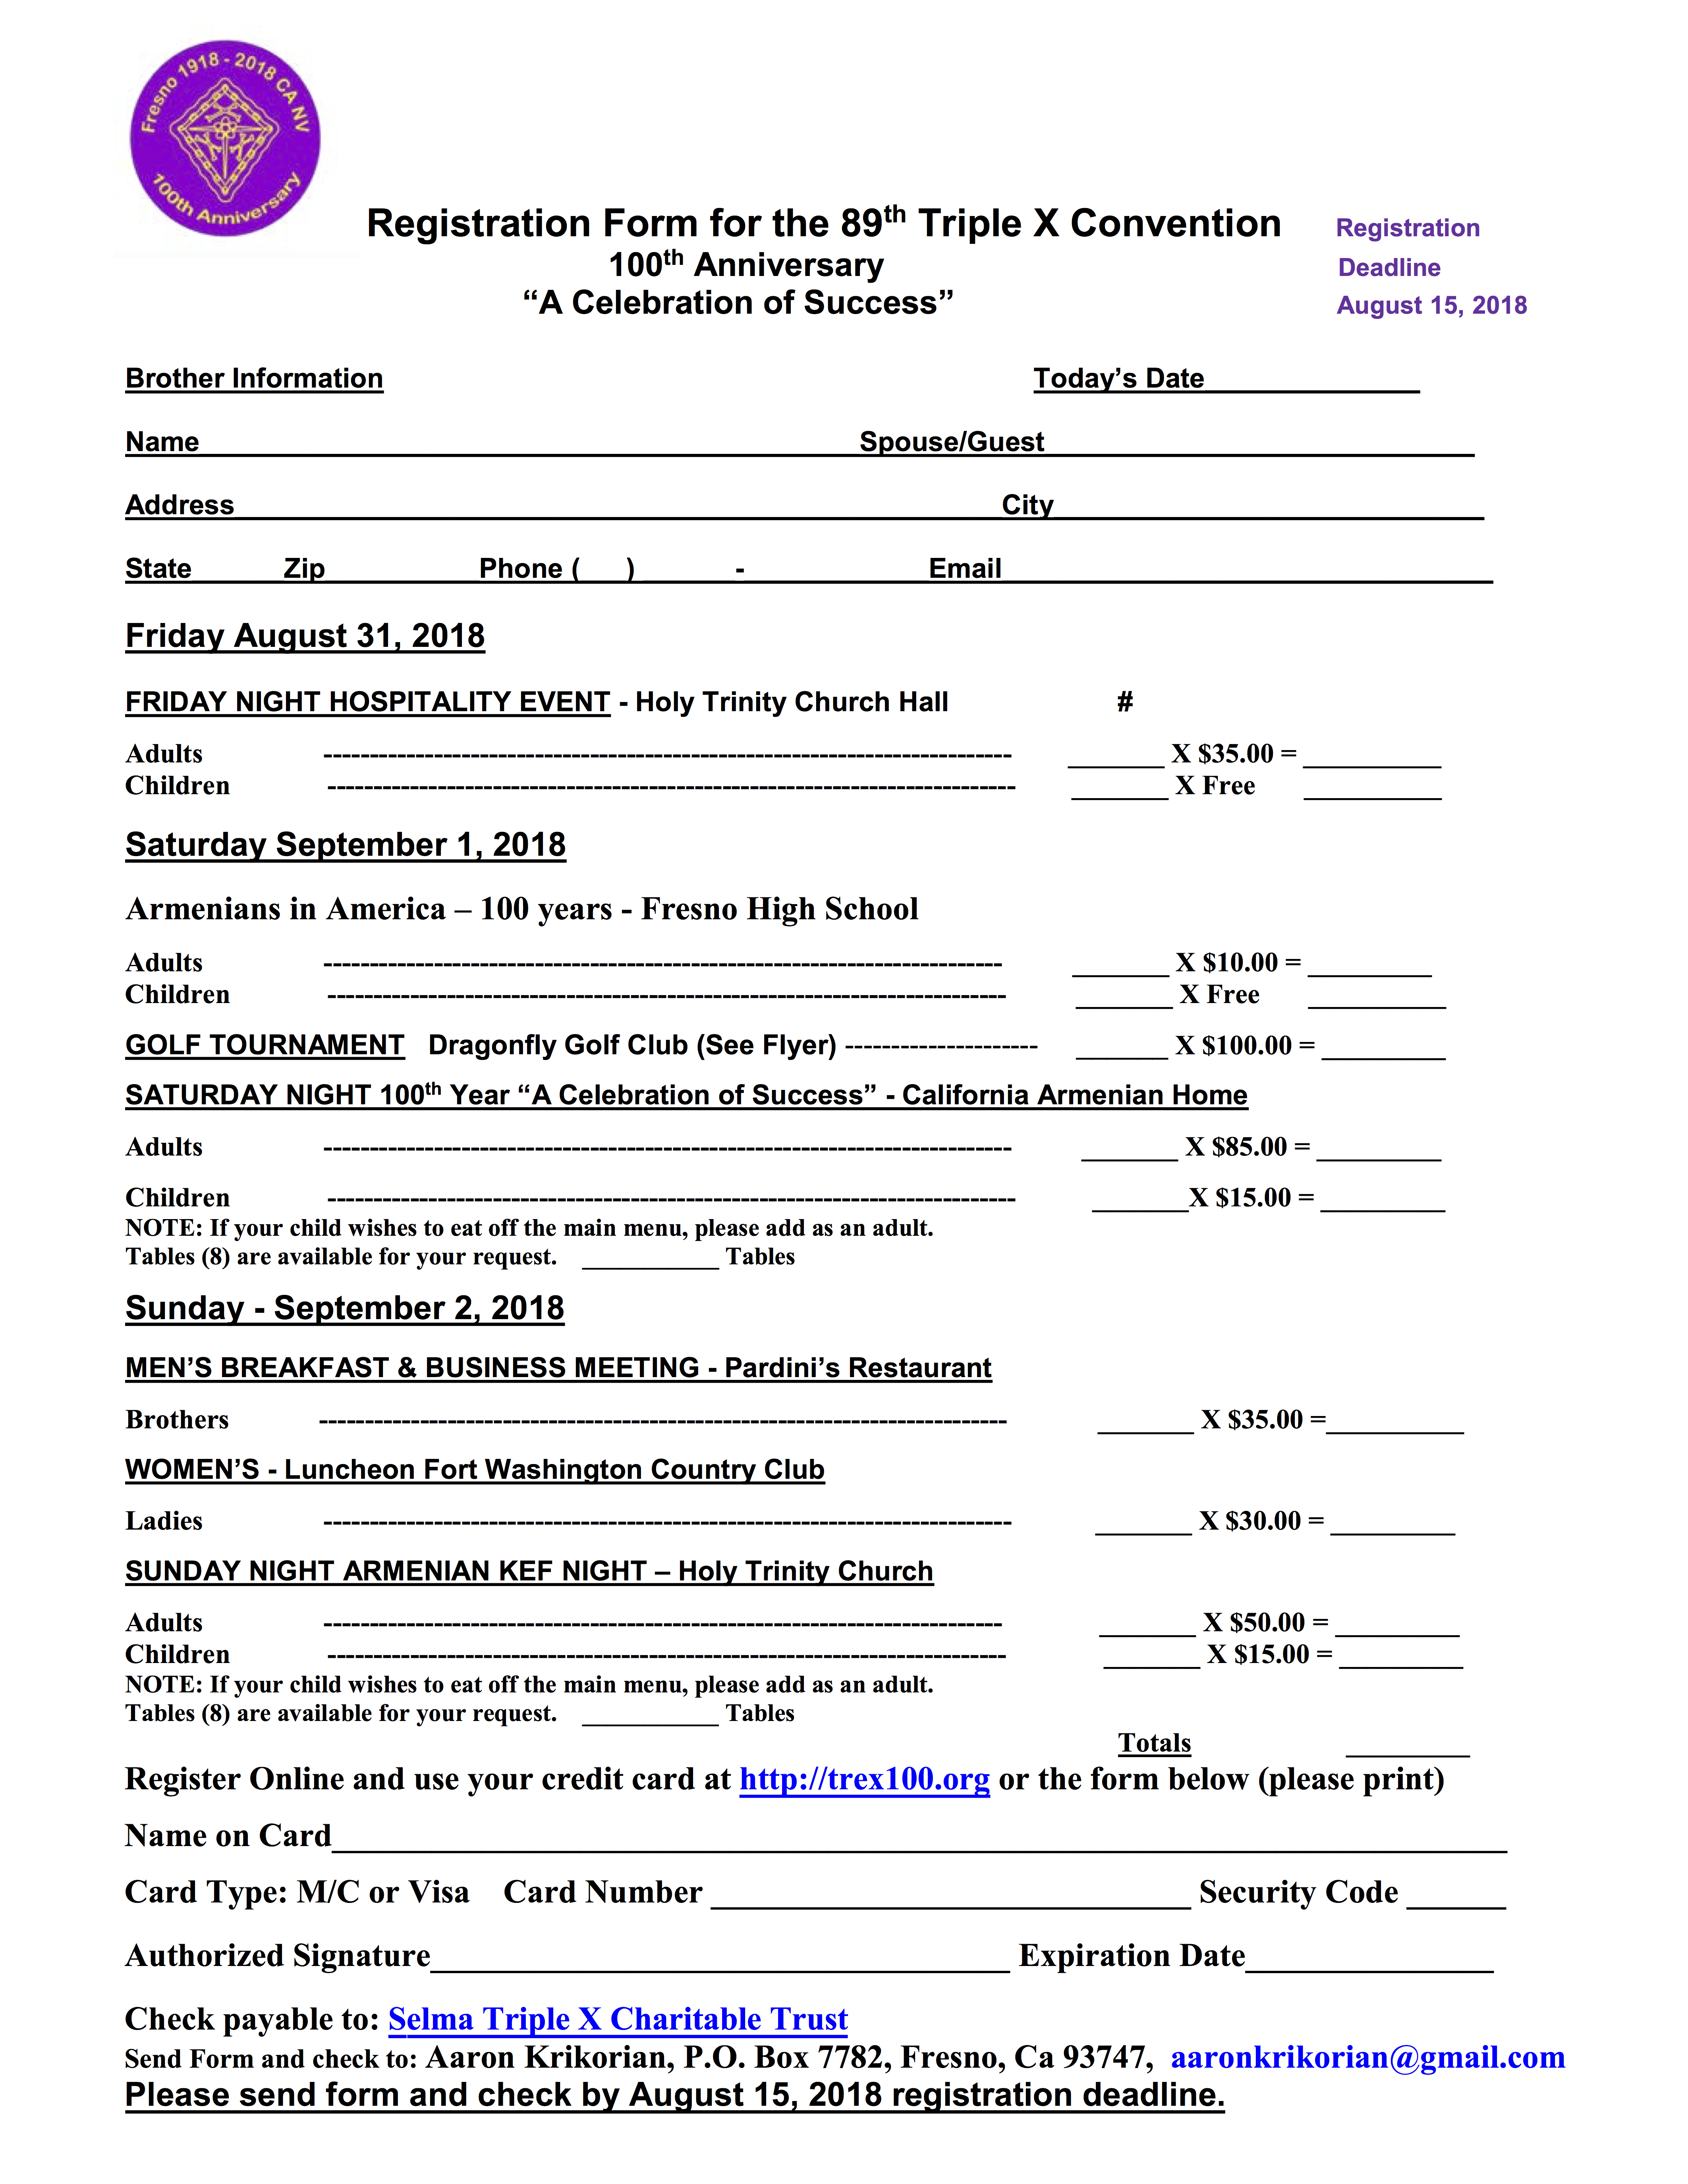 Registration Form 89th Convention